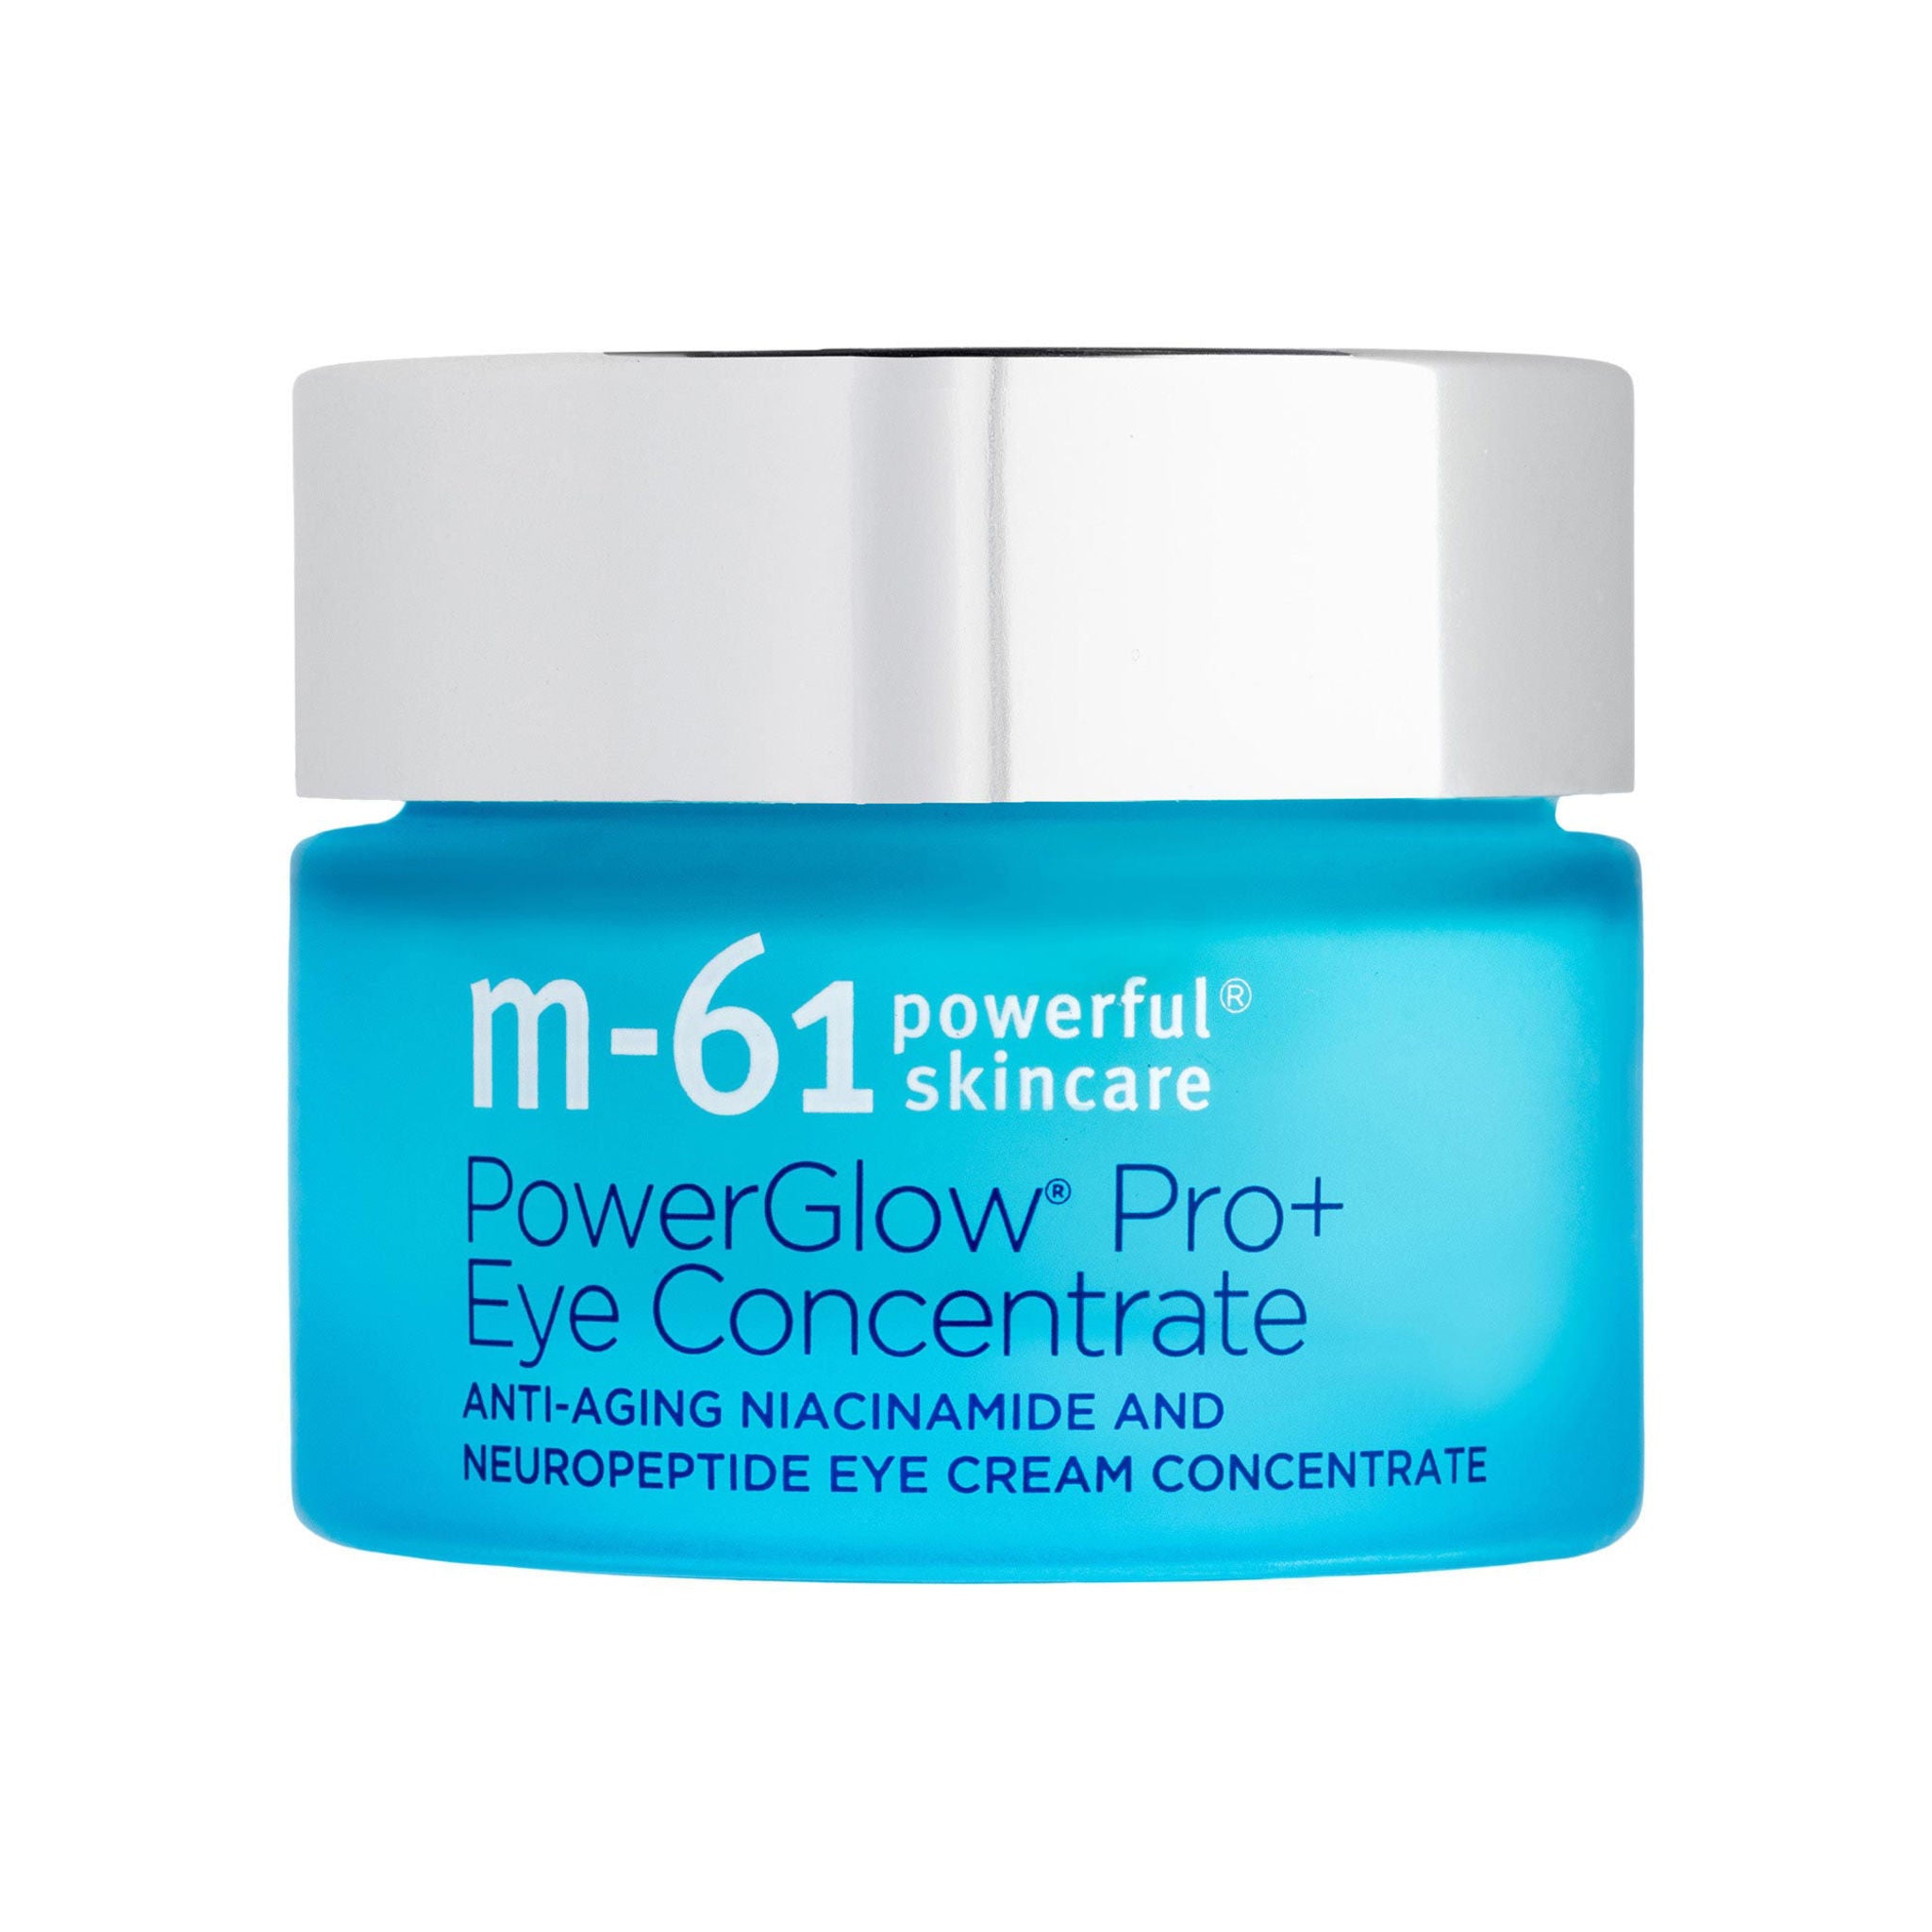 M-61 PowerGlow Pro+ Eye Concentrate main image.